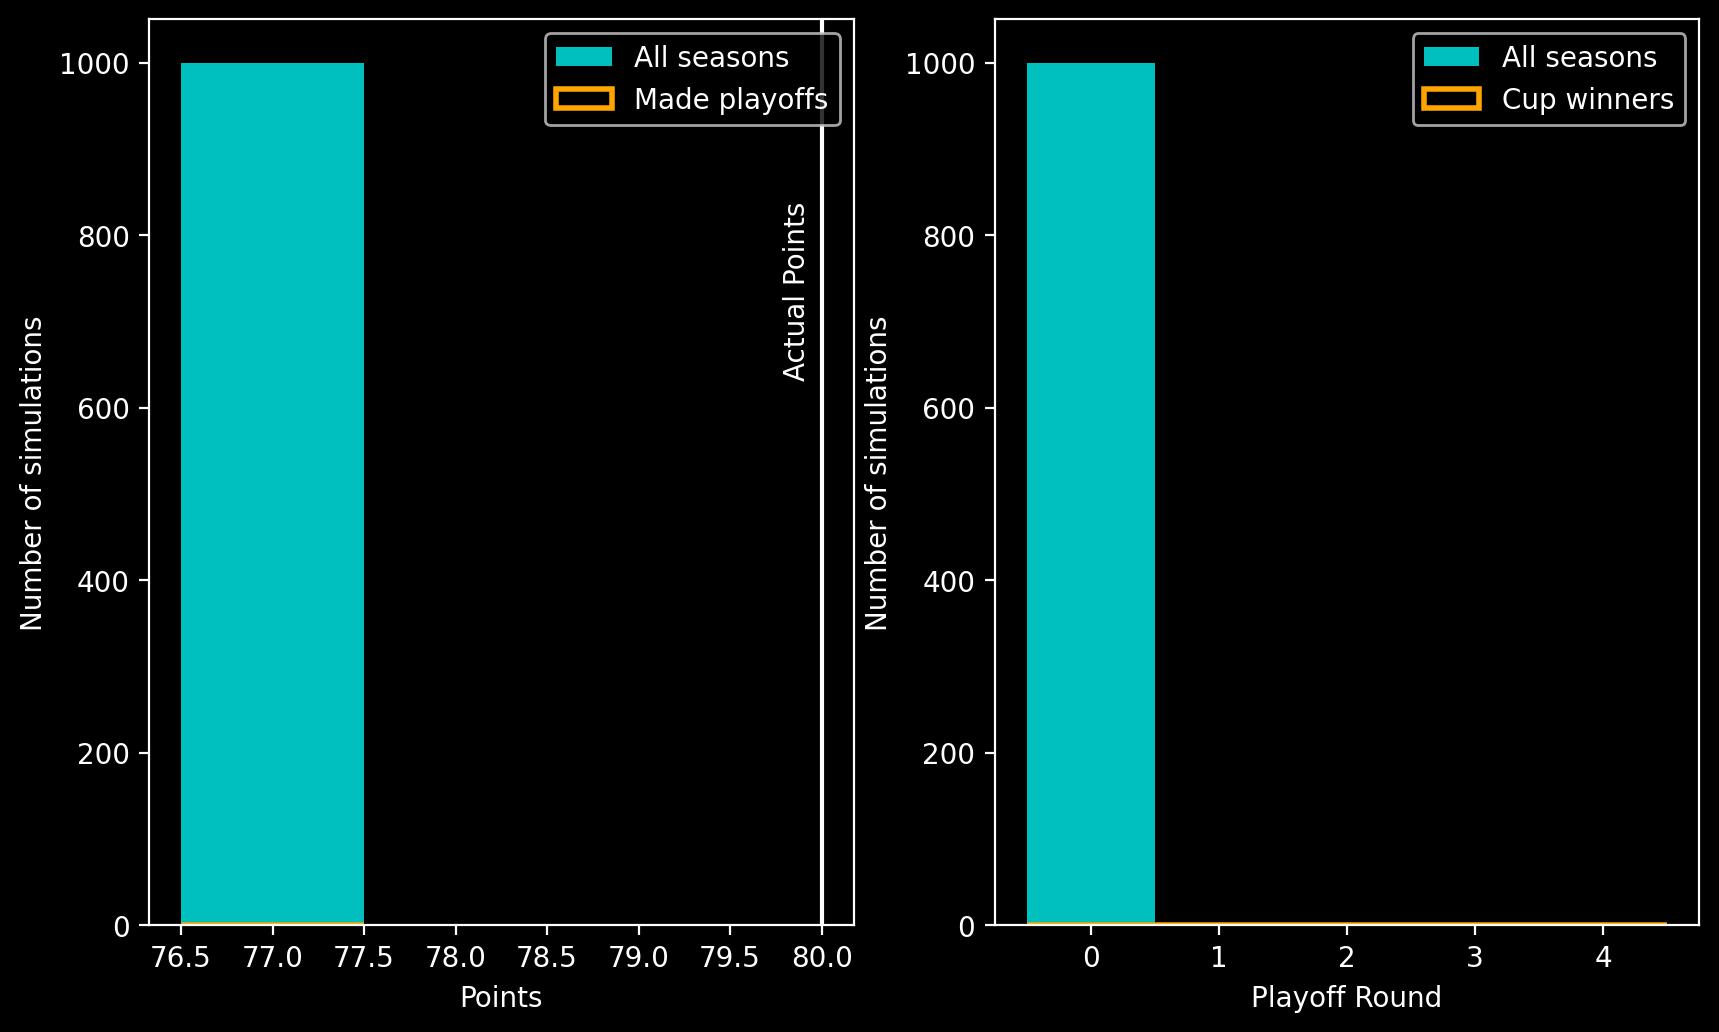 Two panel plot showing histograms. Left panel shows a histogram of points on the x-axis against number of simulations on the y-axis, the peak is at 77 points. Right panel shows playoff round on the x-axis against number of simulations on the y-axis. The largest bar is at playoff round 0.